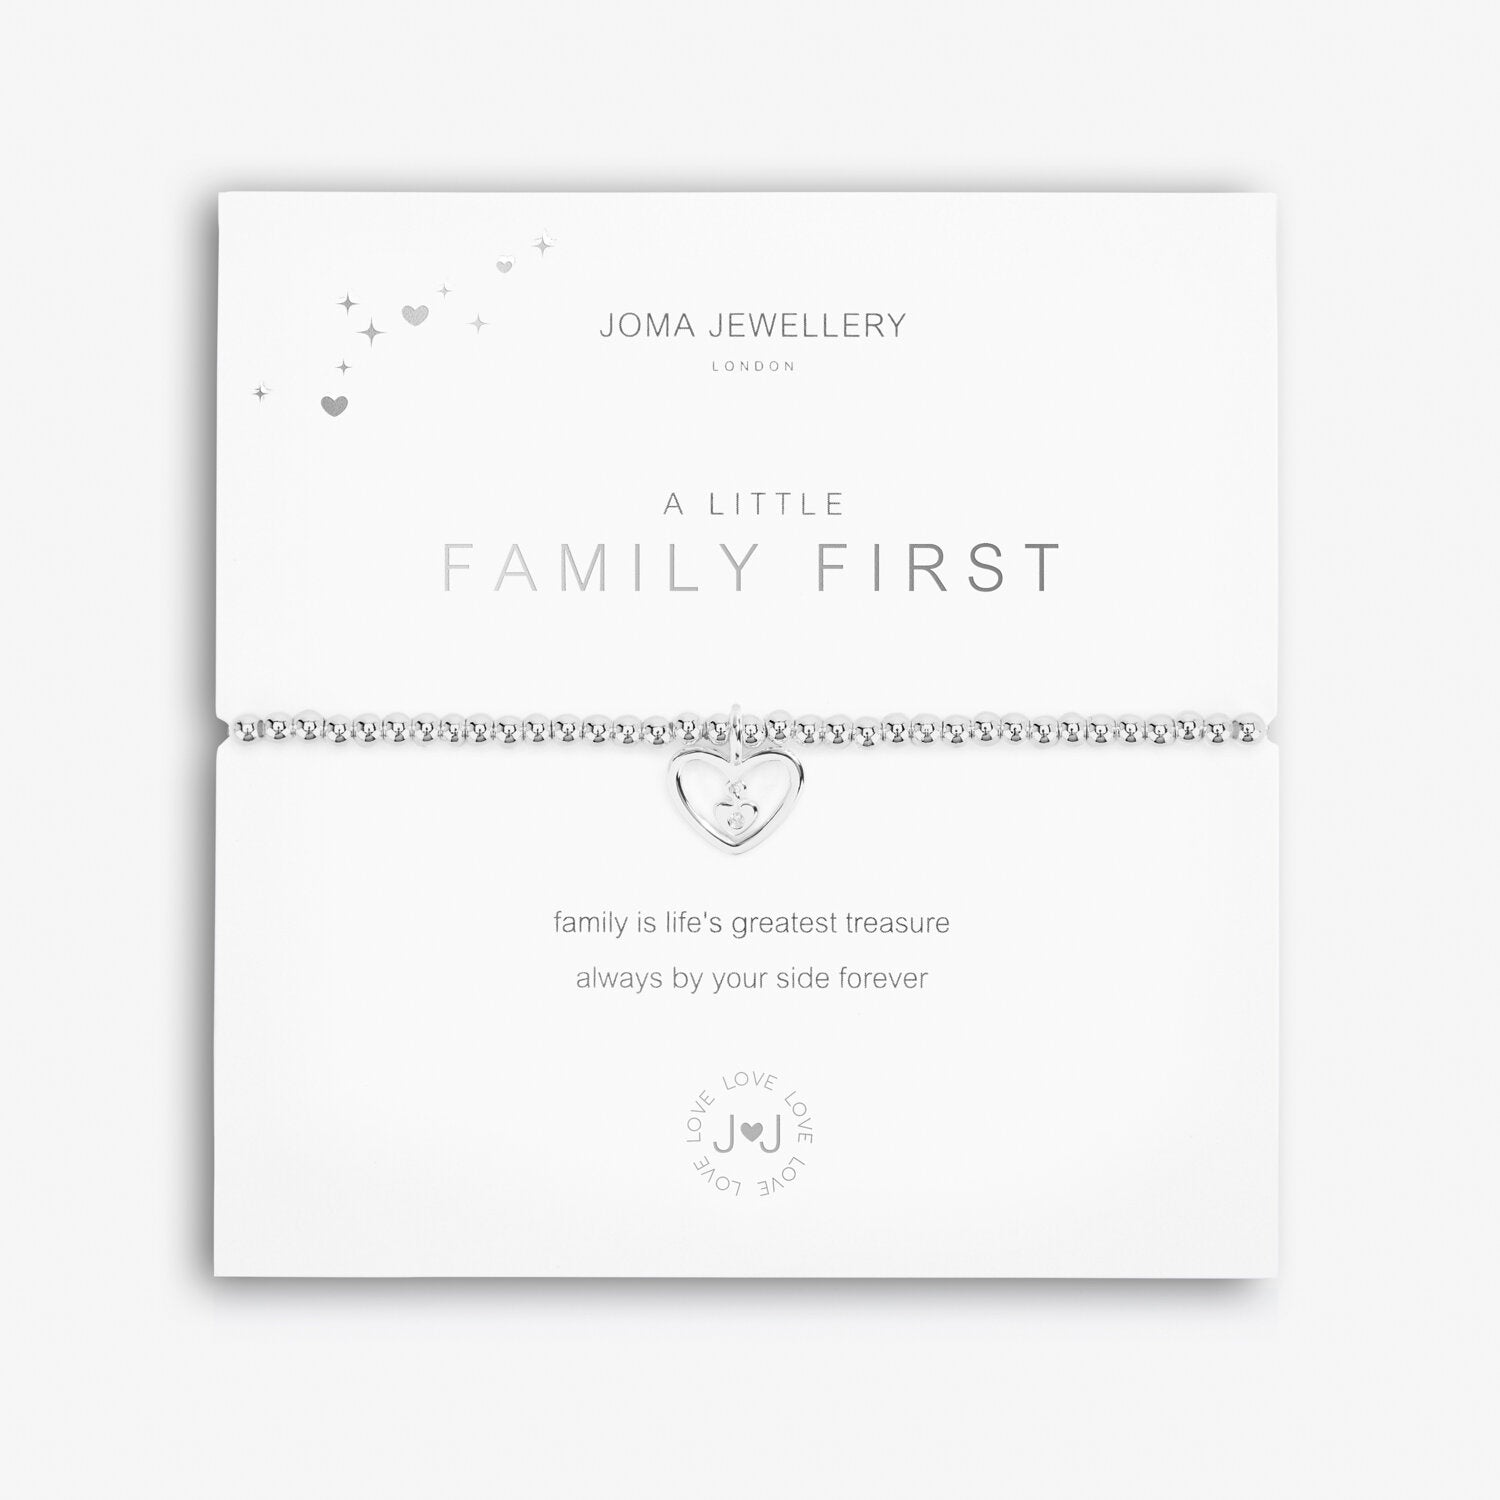 Joma Jewellery A Little 'Family First' Bracelet | More Than Just A Gift